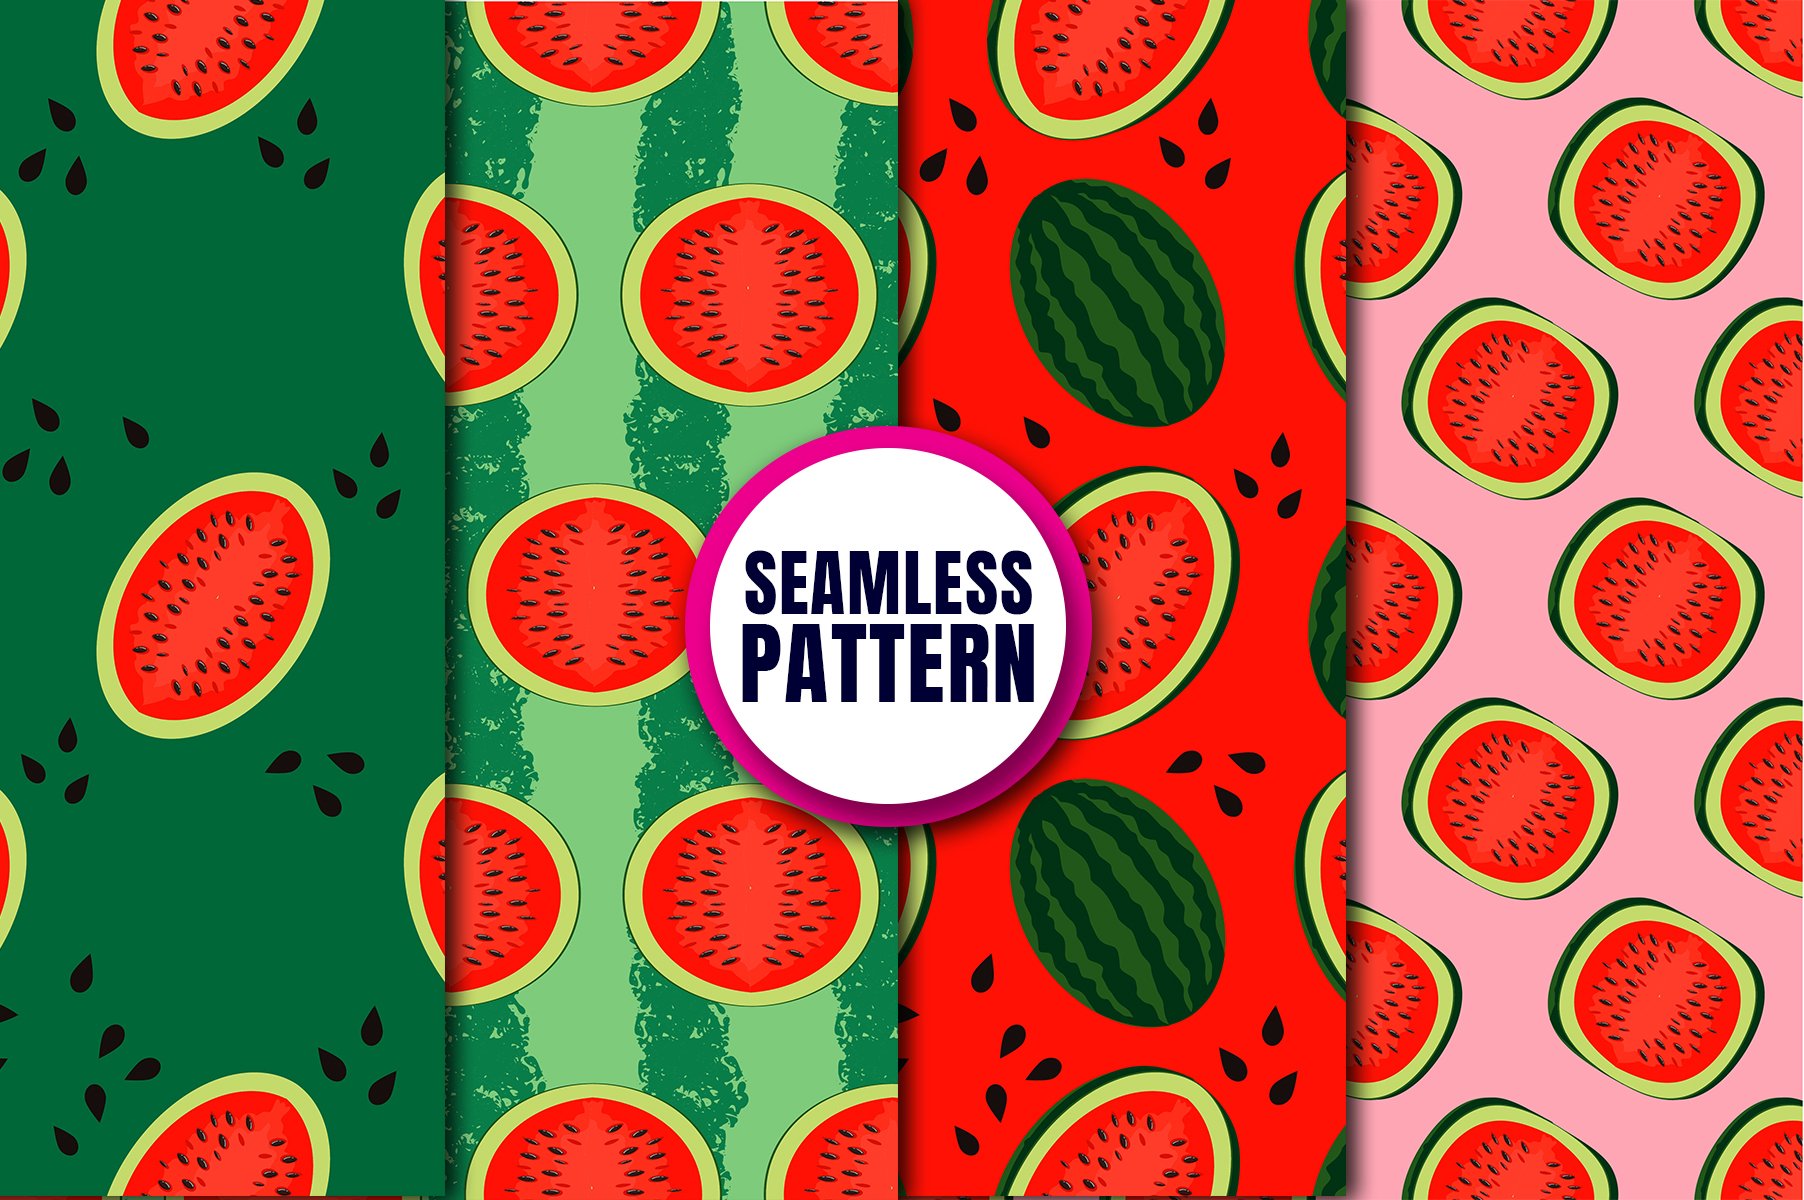 Watermelon seamless pattern cover image.